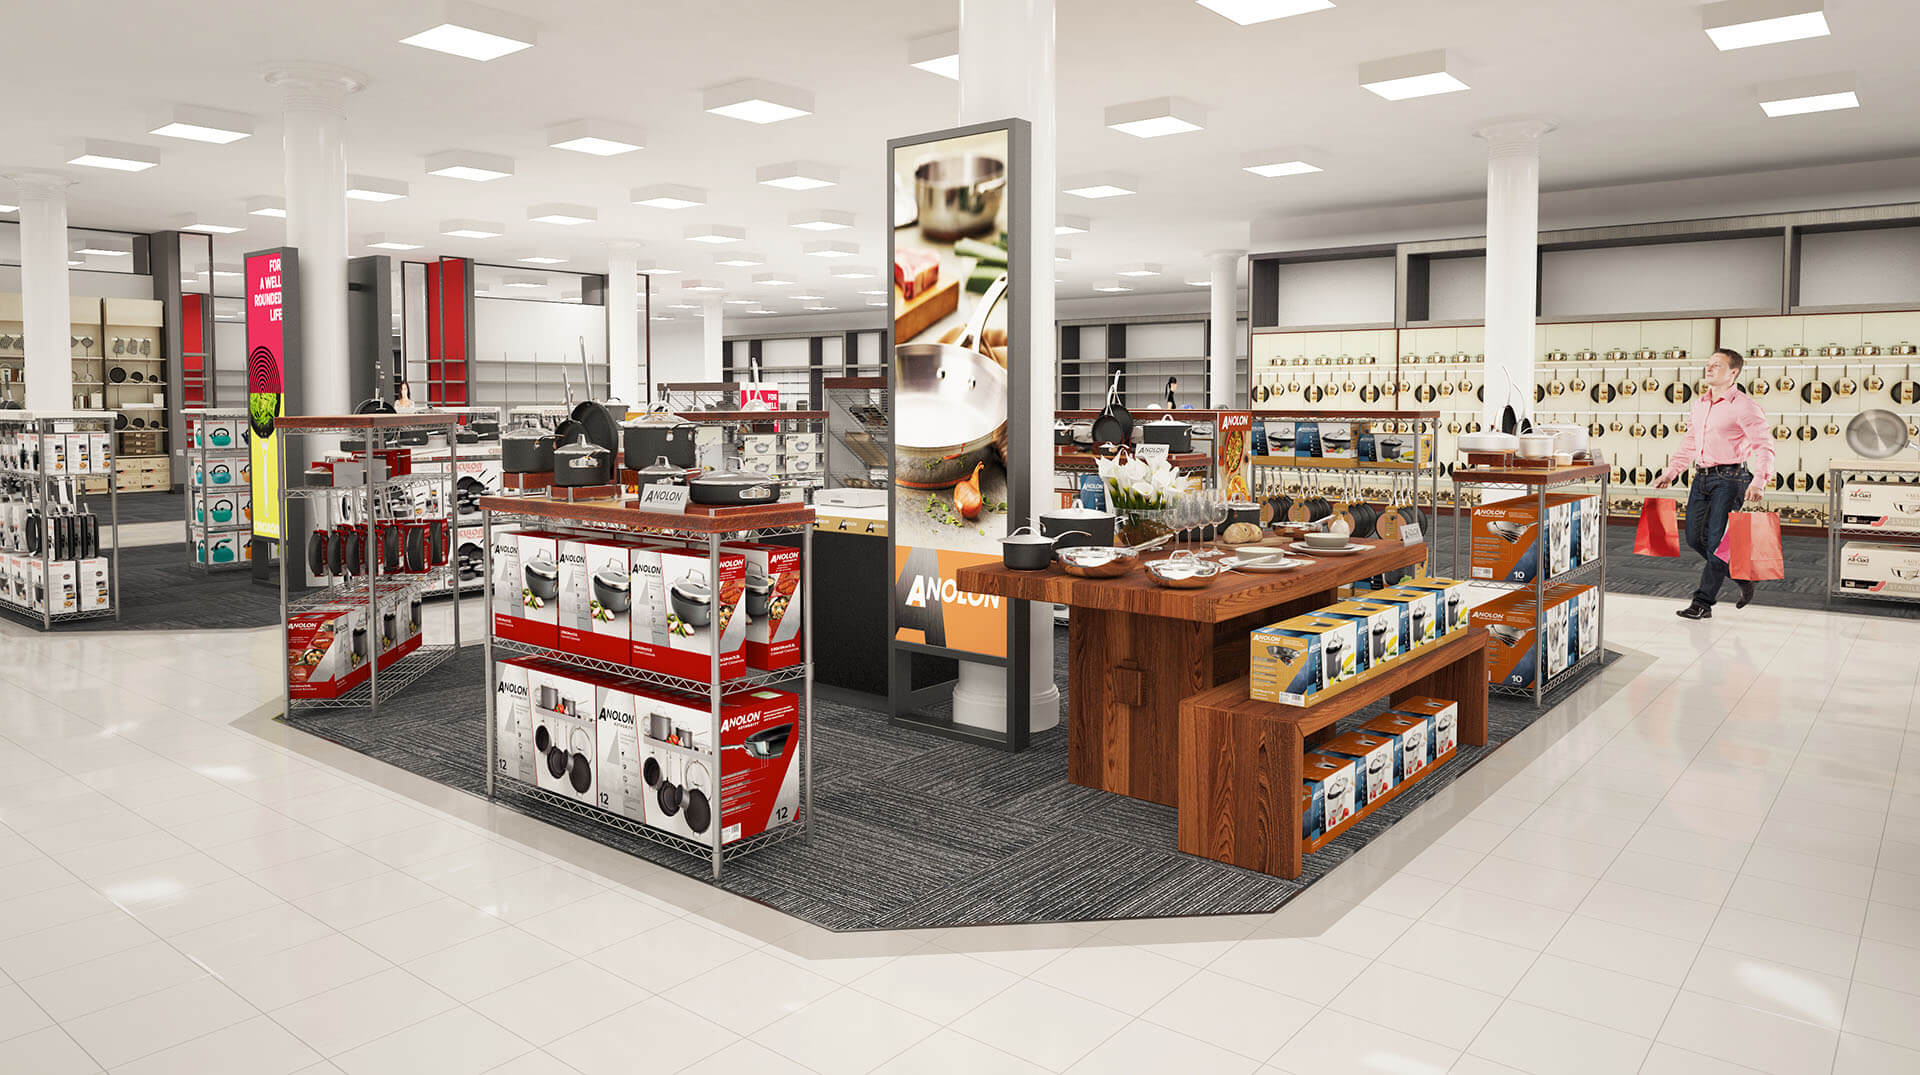 photo-realistic computer-generated rendering of a Anolon cookware display at Macy's